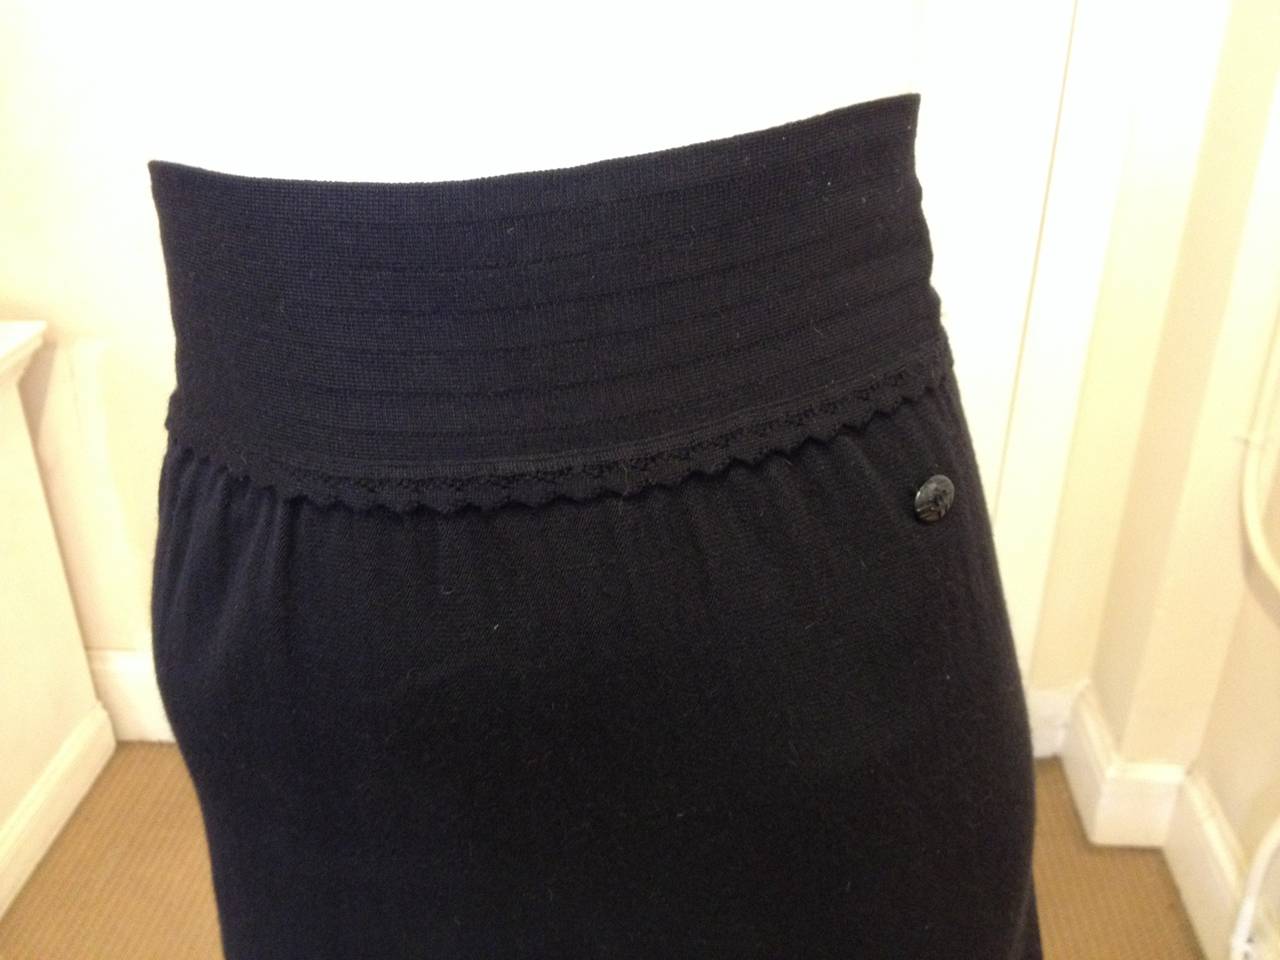 We're loopy for this Chanel skirt! This piece is fun yet subtle and interesting - it would be great for a business lunch or for a night out for cocktails. Fitted throughout the hips and then flared into an a-line shape, it has a comfortable wide